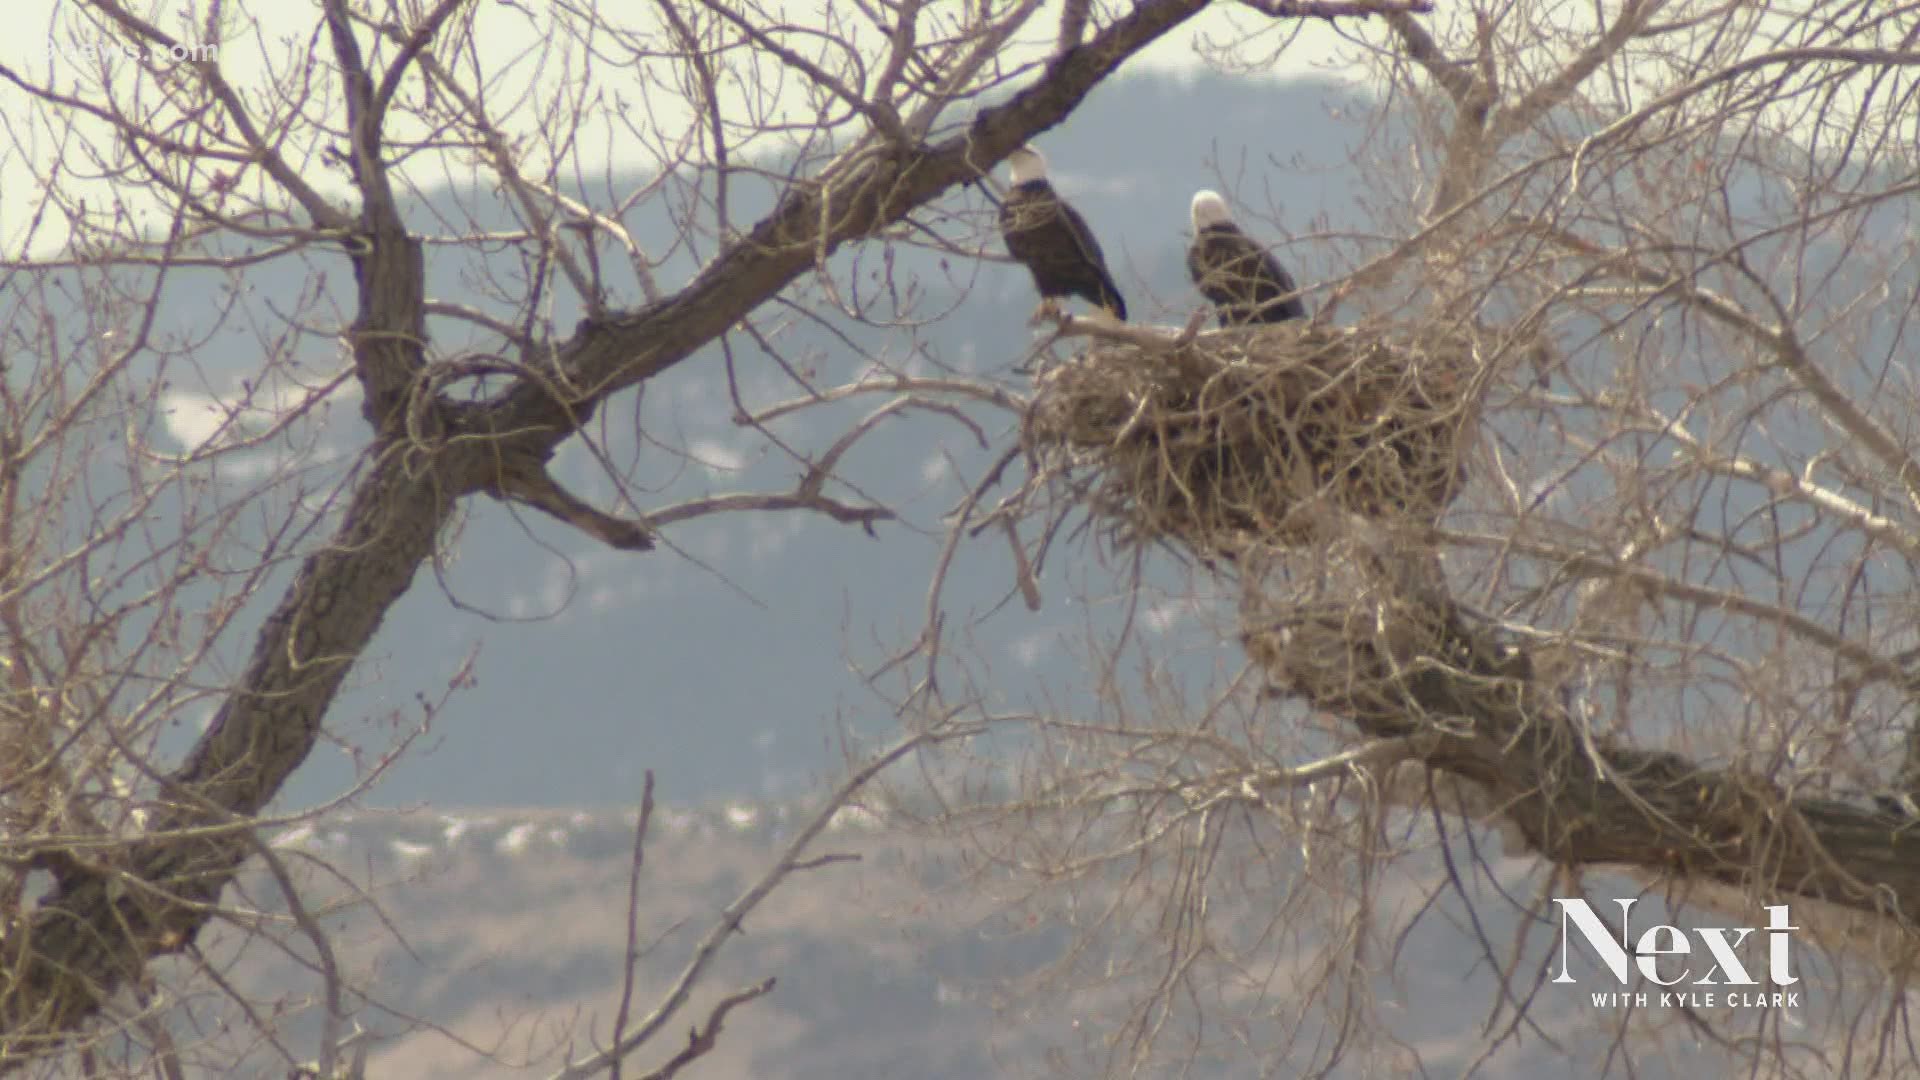 There's an update to the baby momma drama (of the feathered variety) in Standley Lake. Two updates, actually. The couple has two eggs in the nest.